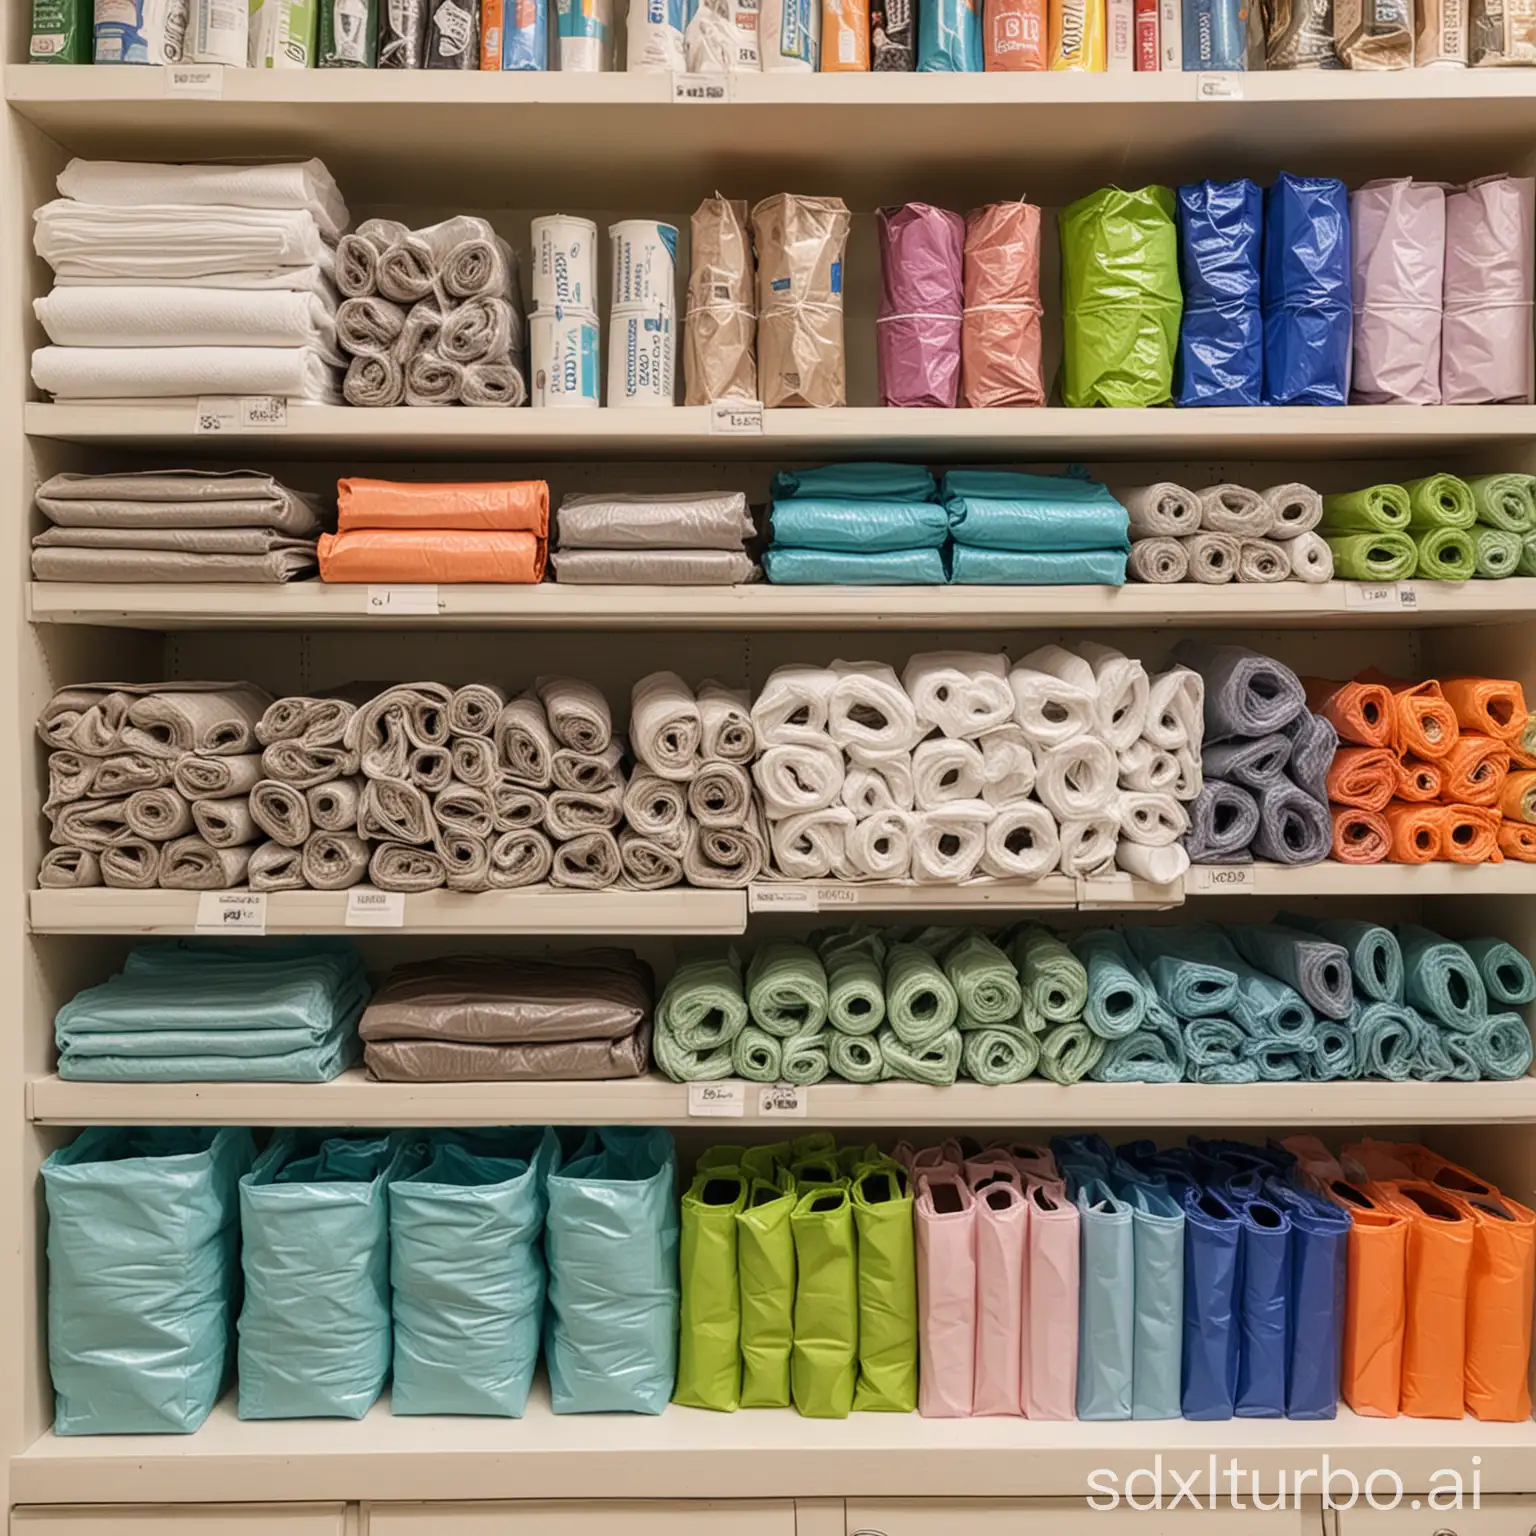 A variety of household supplies, such as trash bags, paper towels, and plastic bags, are neatly organized on a shelf. The products are brightly colored and have a variety of textures.